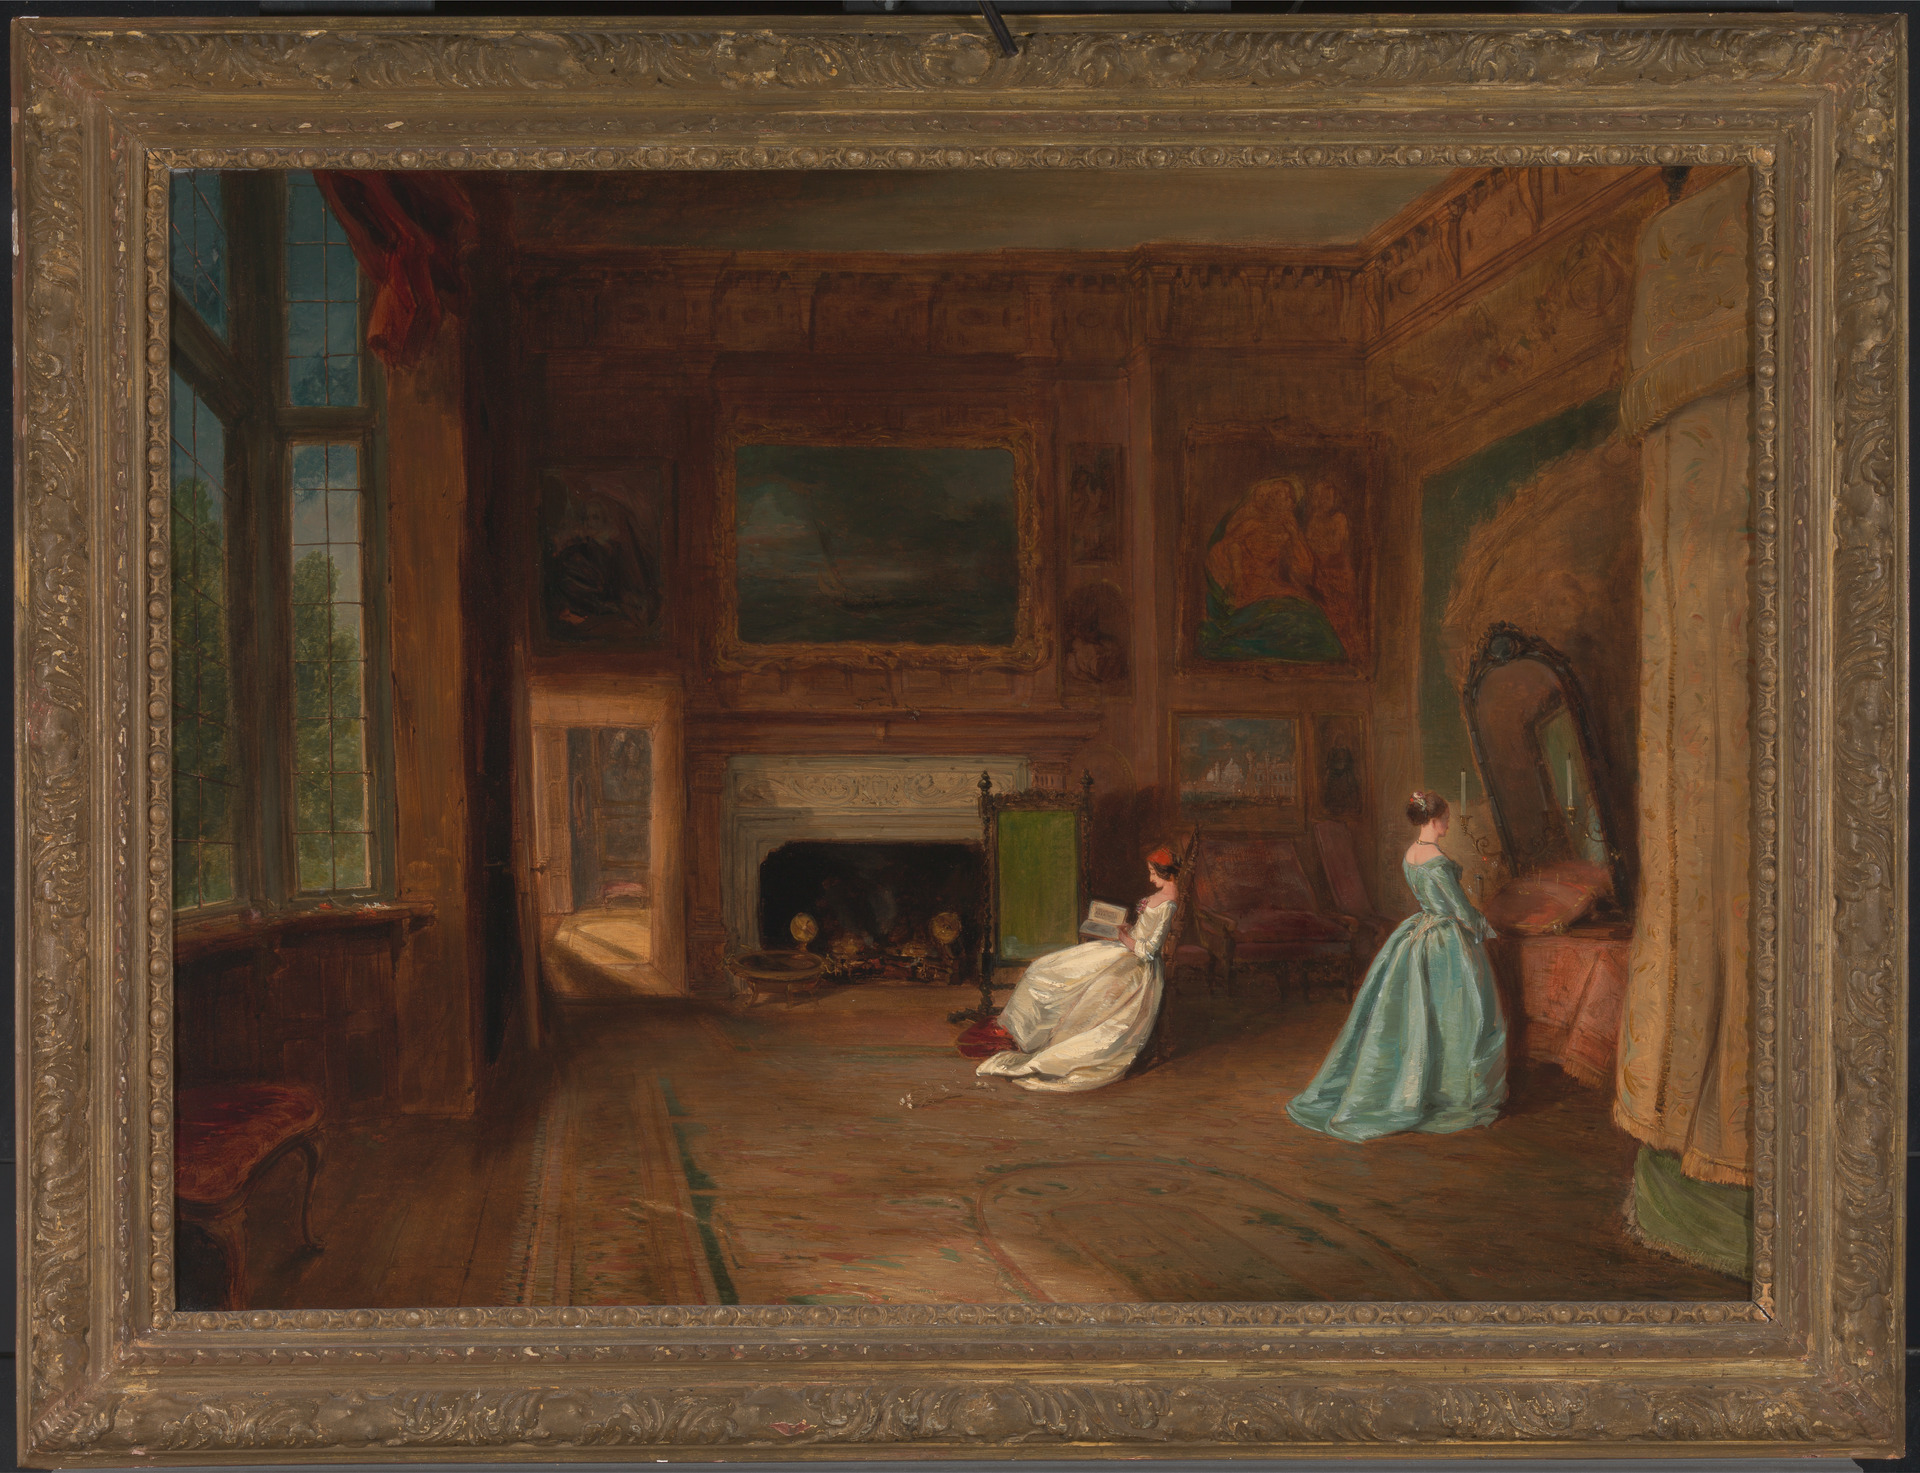 James Holland, The Lady Betty Germain Bedroom at Knole, Kent, 1845 (Yale Center for British Art)